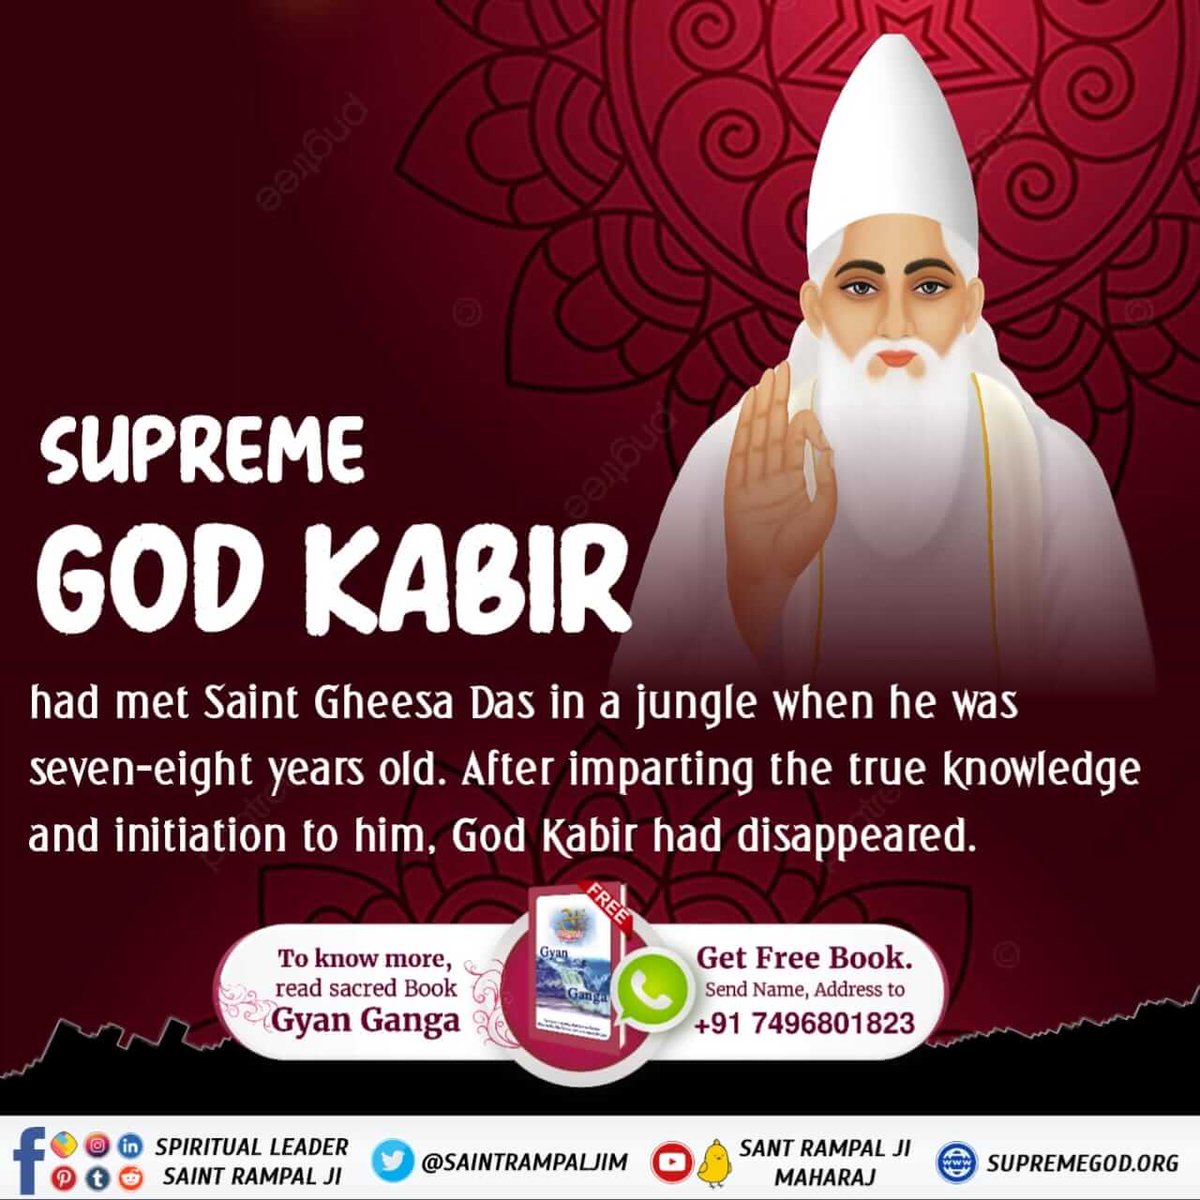 #आँखों_देखा_भगवान_को सुनो उस अमृतज्ञान को
SUPREME GOD KABIR had met Saint Gheesa Das in a jungle when he was seven-eight years old. After imparting the true knowledge
and initiation to him, God Kabir had disappeared.